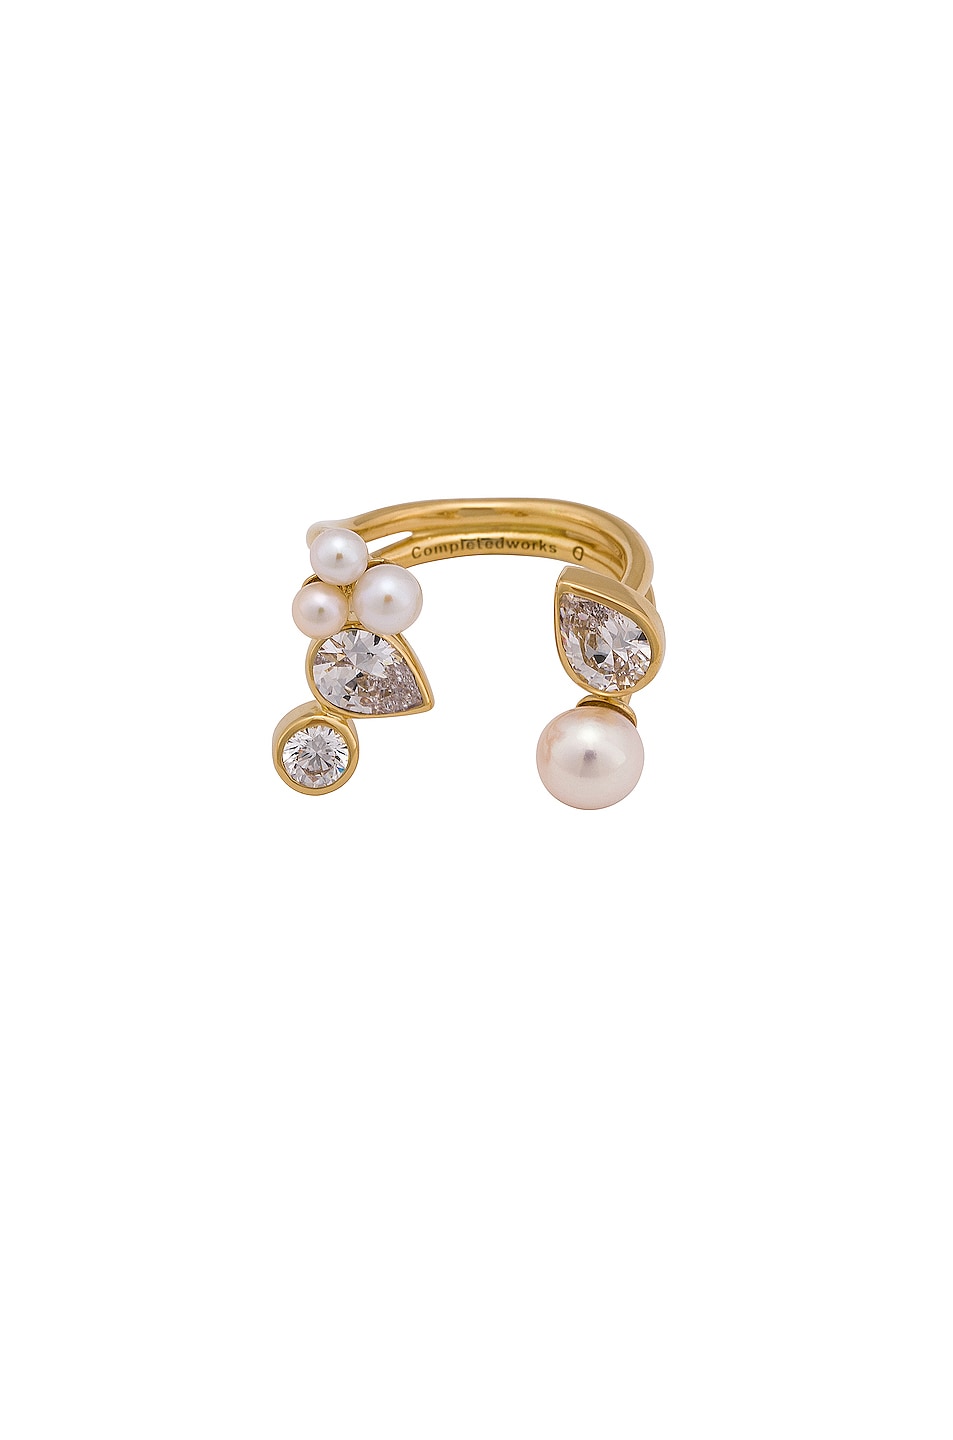 Image 1 of Completedworks CZ Stone Ring in Gold